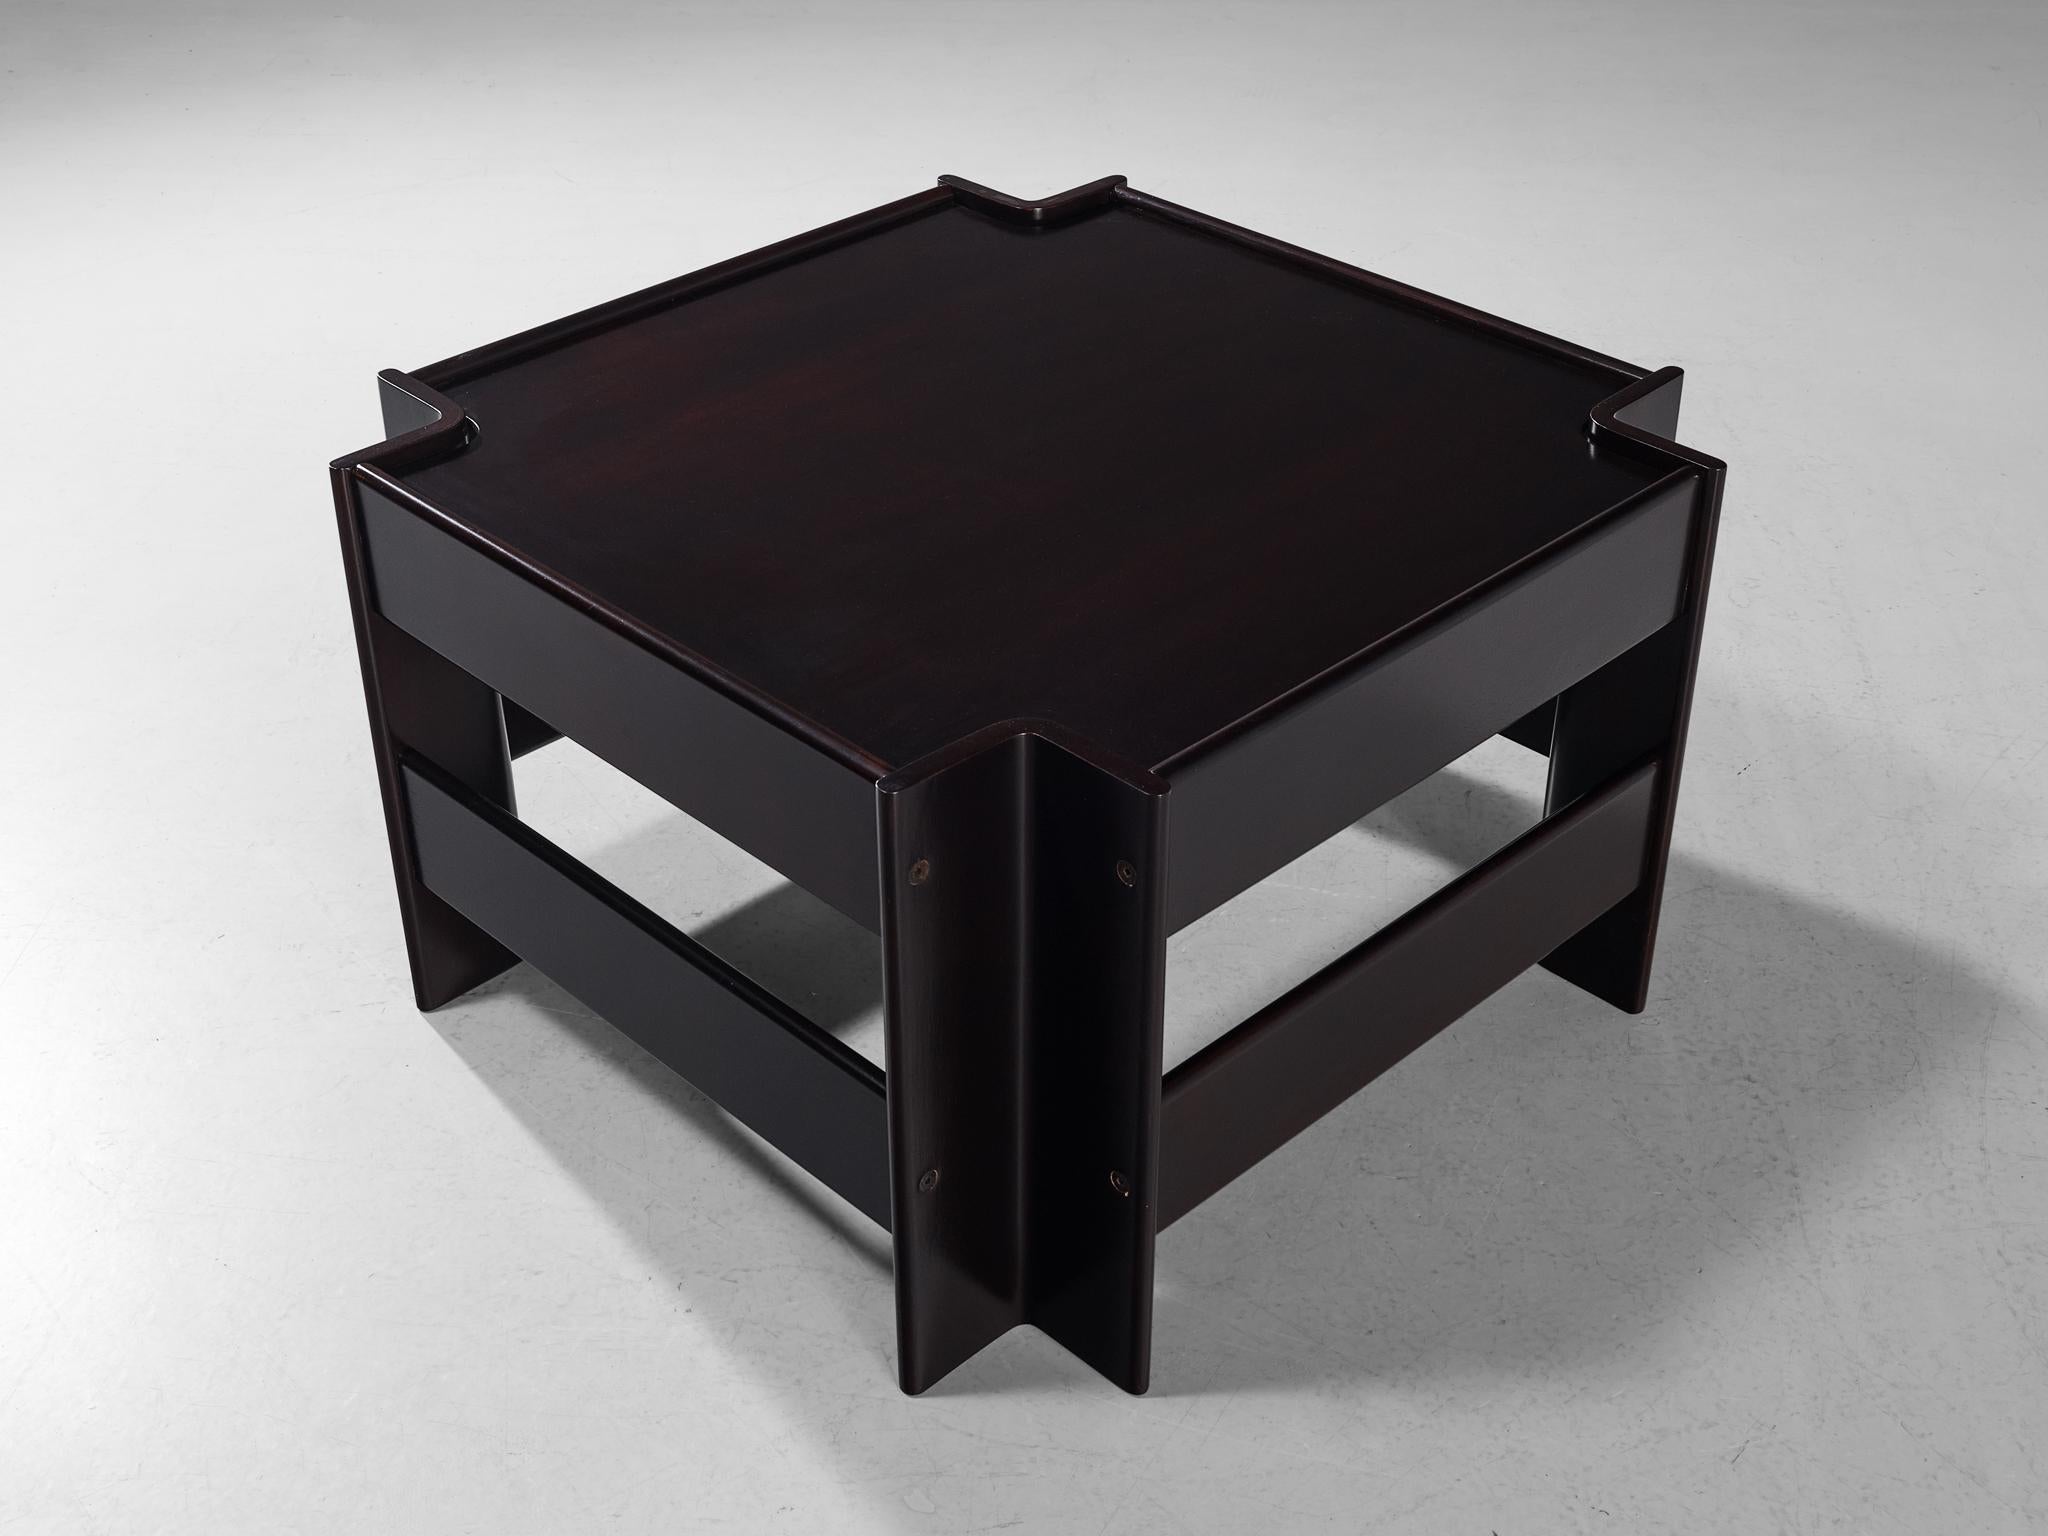 Sergio Asti for Poltronova, 'Zelda' coffee table, darkened plywood, Italy, 1962.

Geometric side table by Sergio Asti. The table is made of plywood and features stunning, cube forms. The angled legs give this item a nice expression. Due to the dark